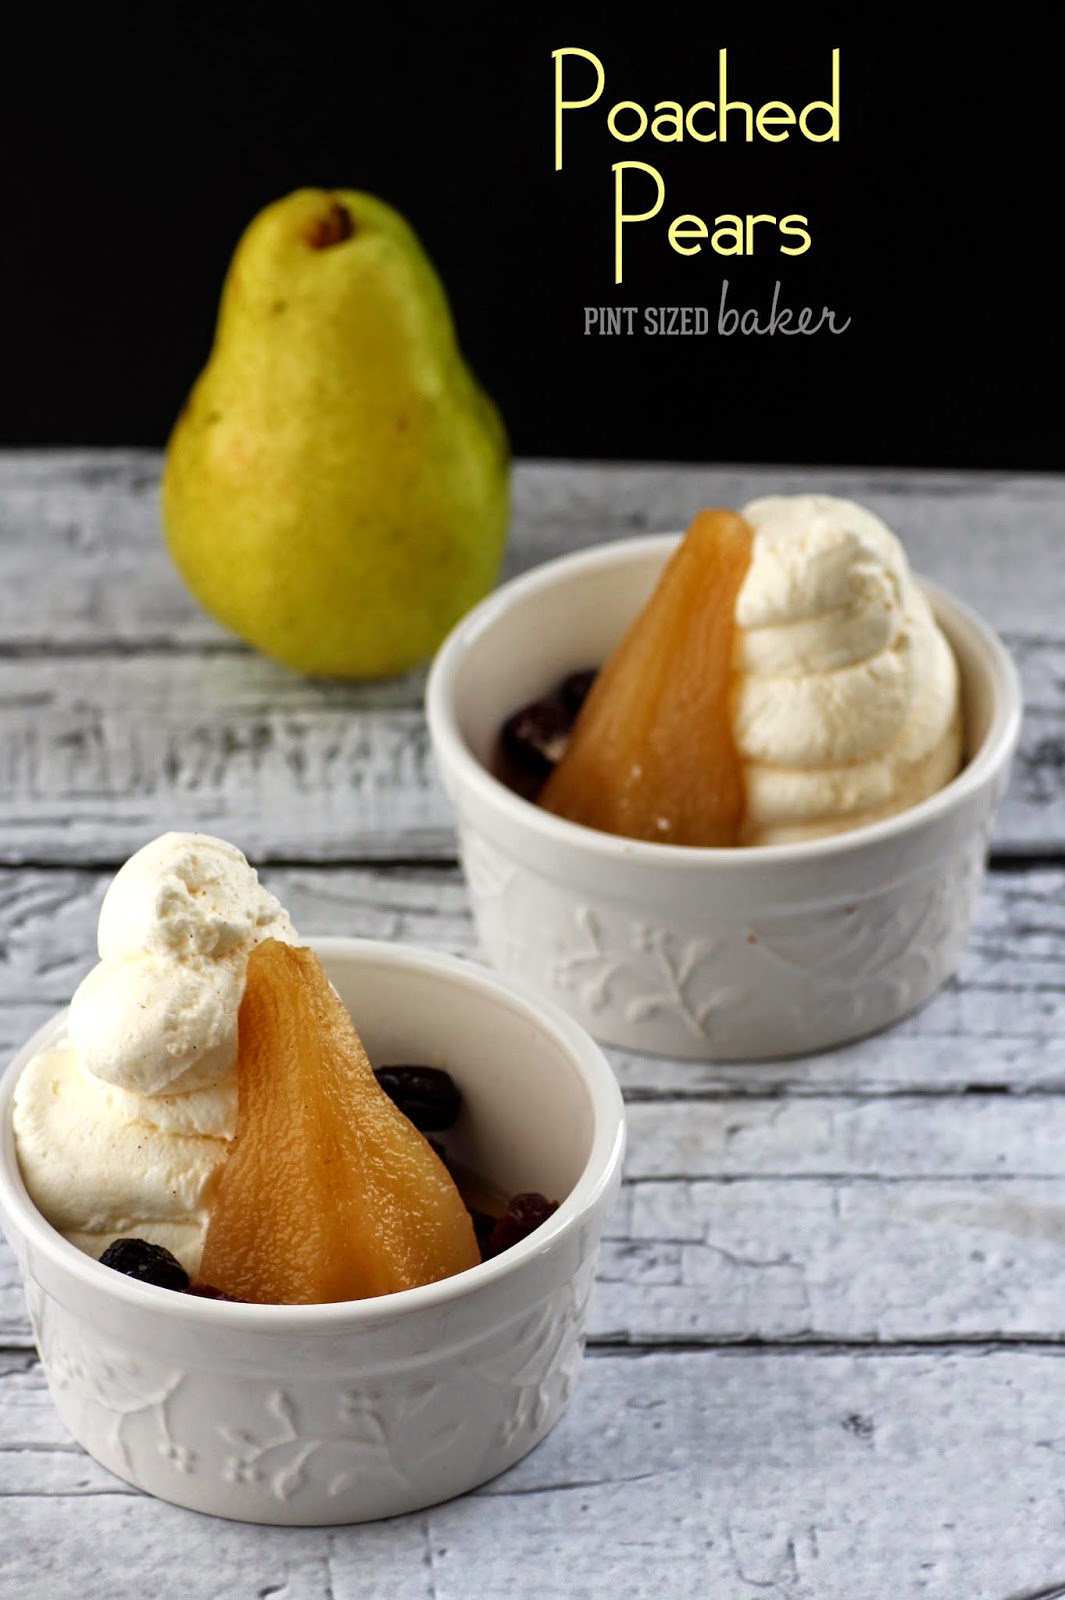 Enjoy some warm, poached pears that are easy to make and delicious for the whole family to enjoy.